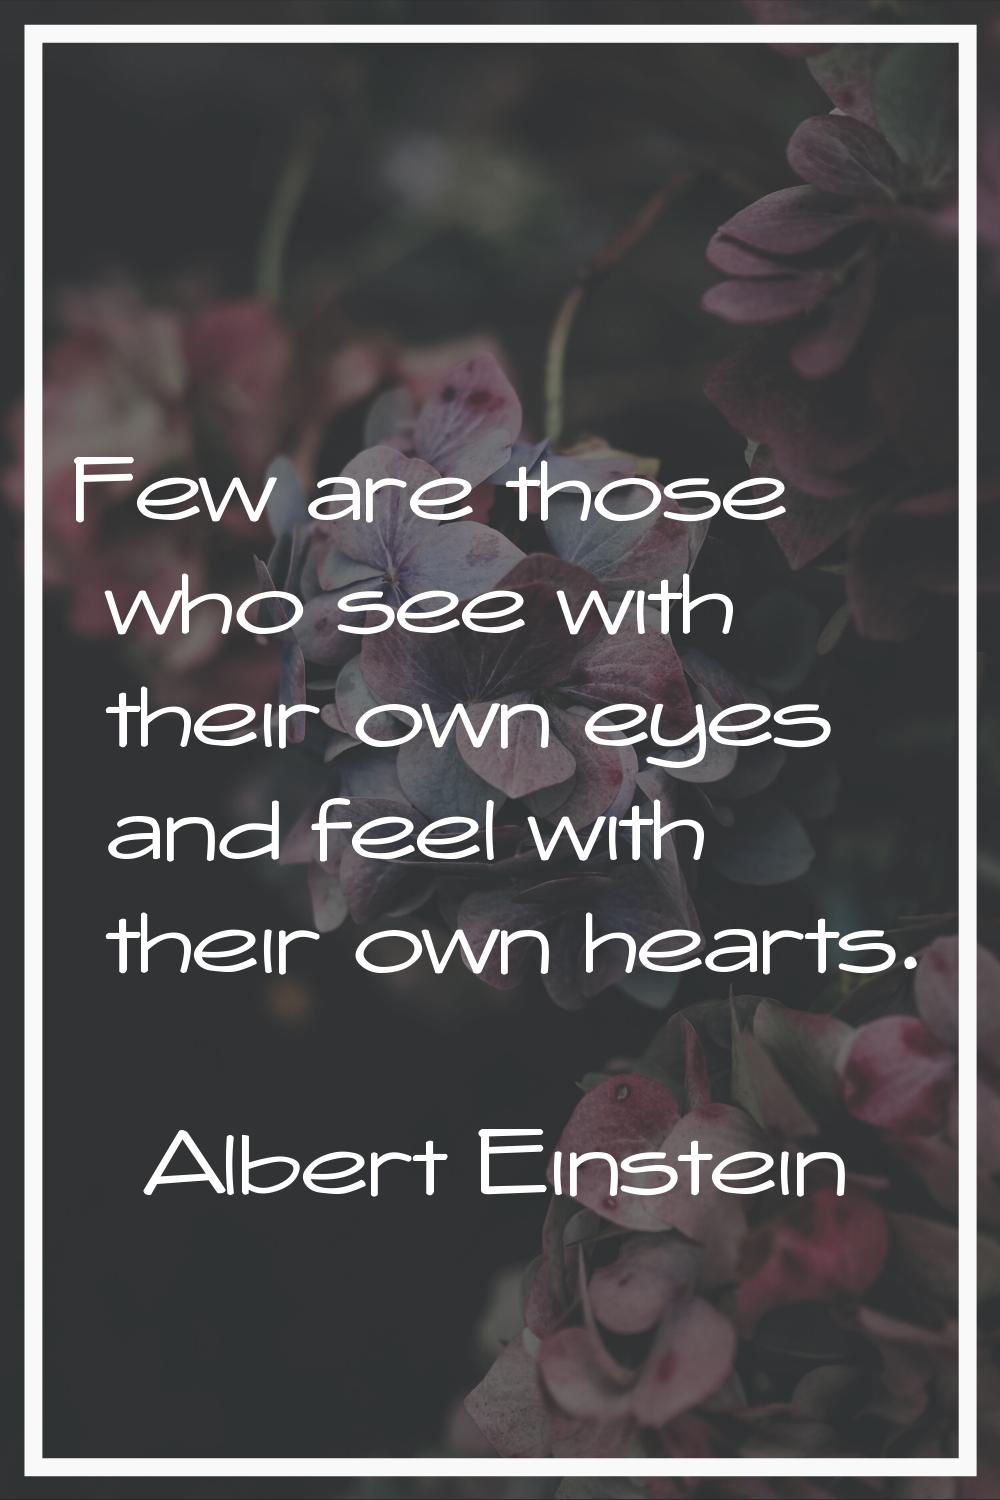 Few are those who see with their own eyes and feel with their own hearts.